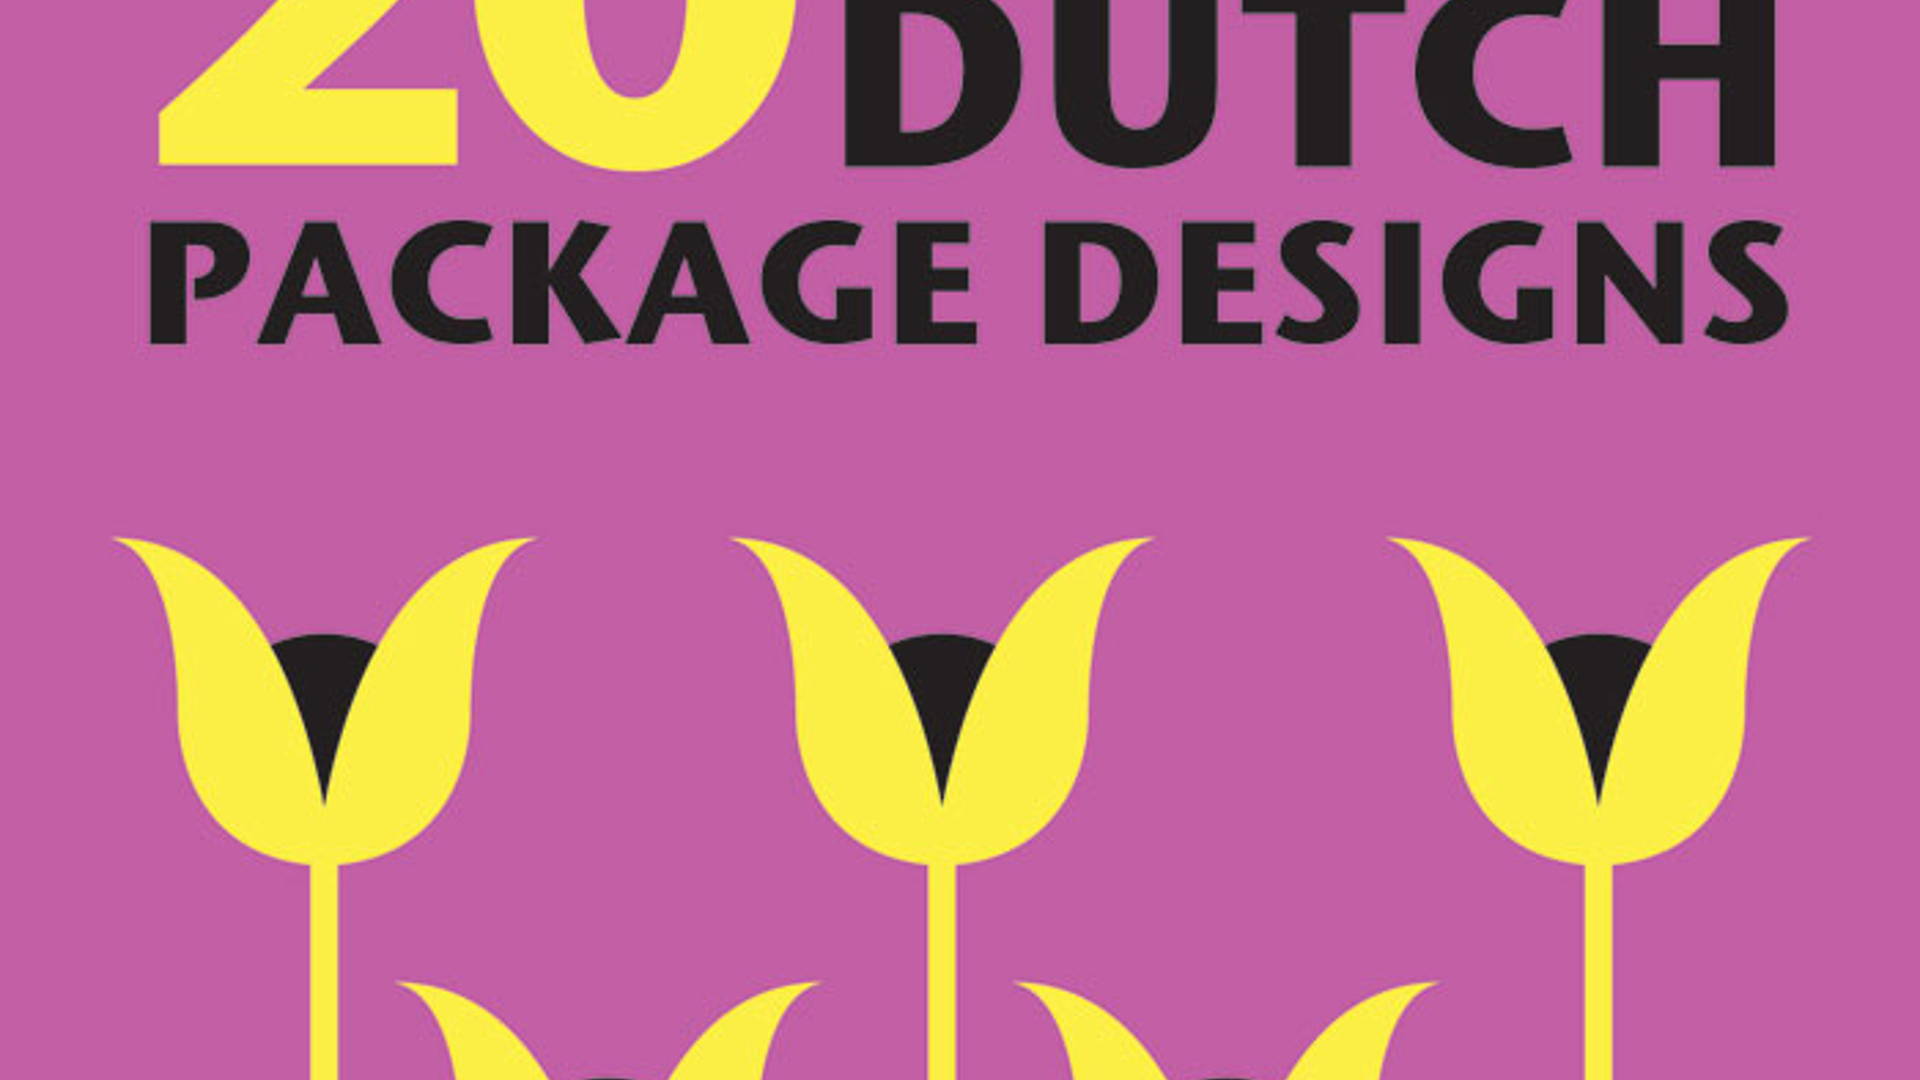 Featured image for 20 Vintage Dutch Package Designs 